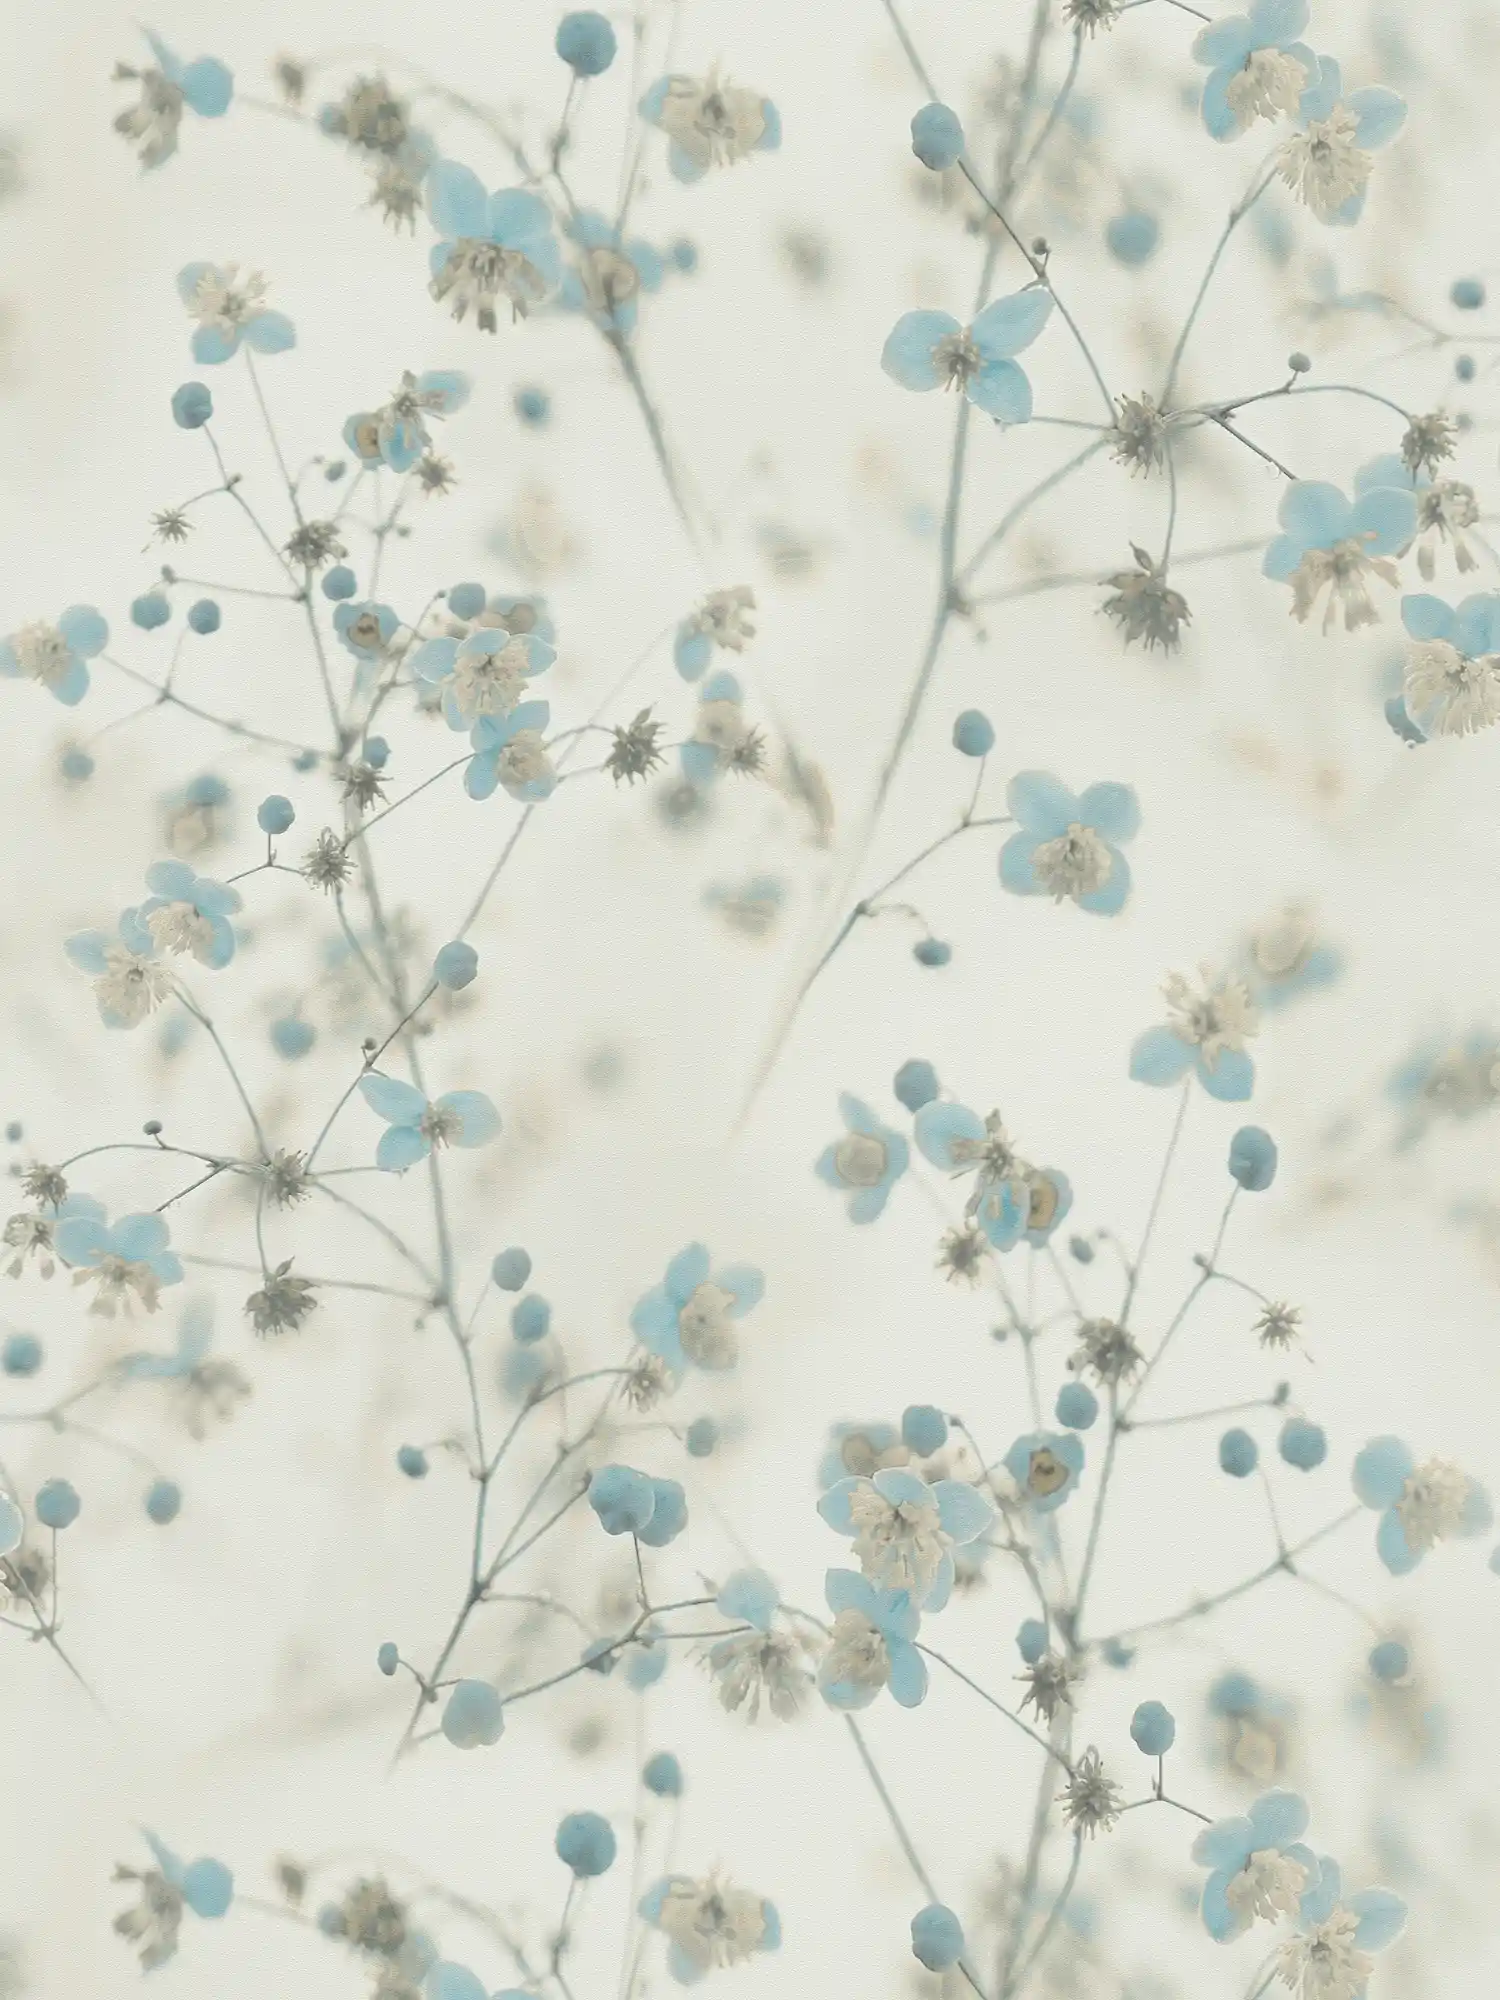 Romantic floral wallpaper photo collage style - grey, blue
